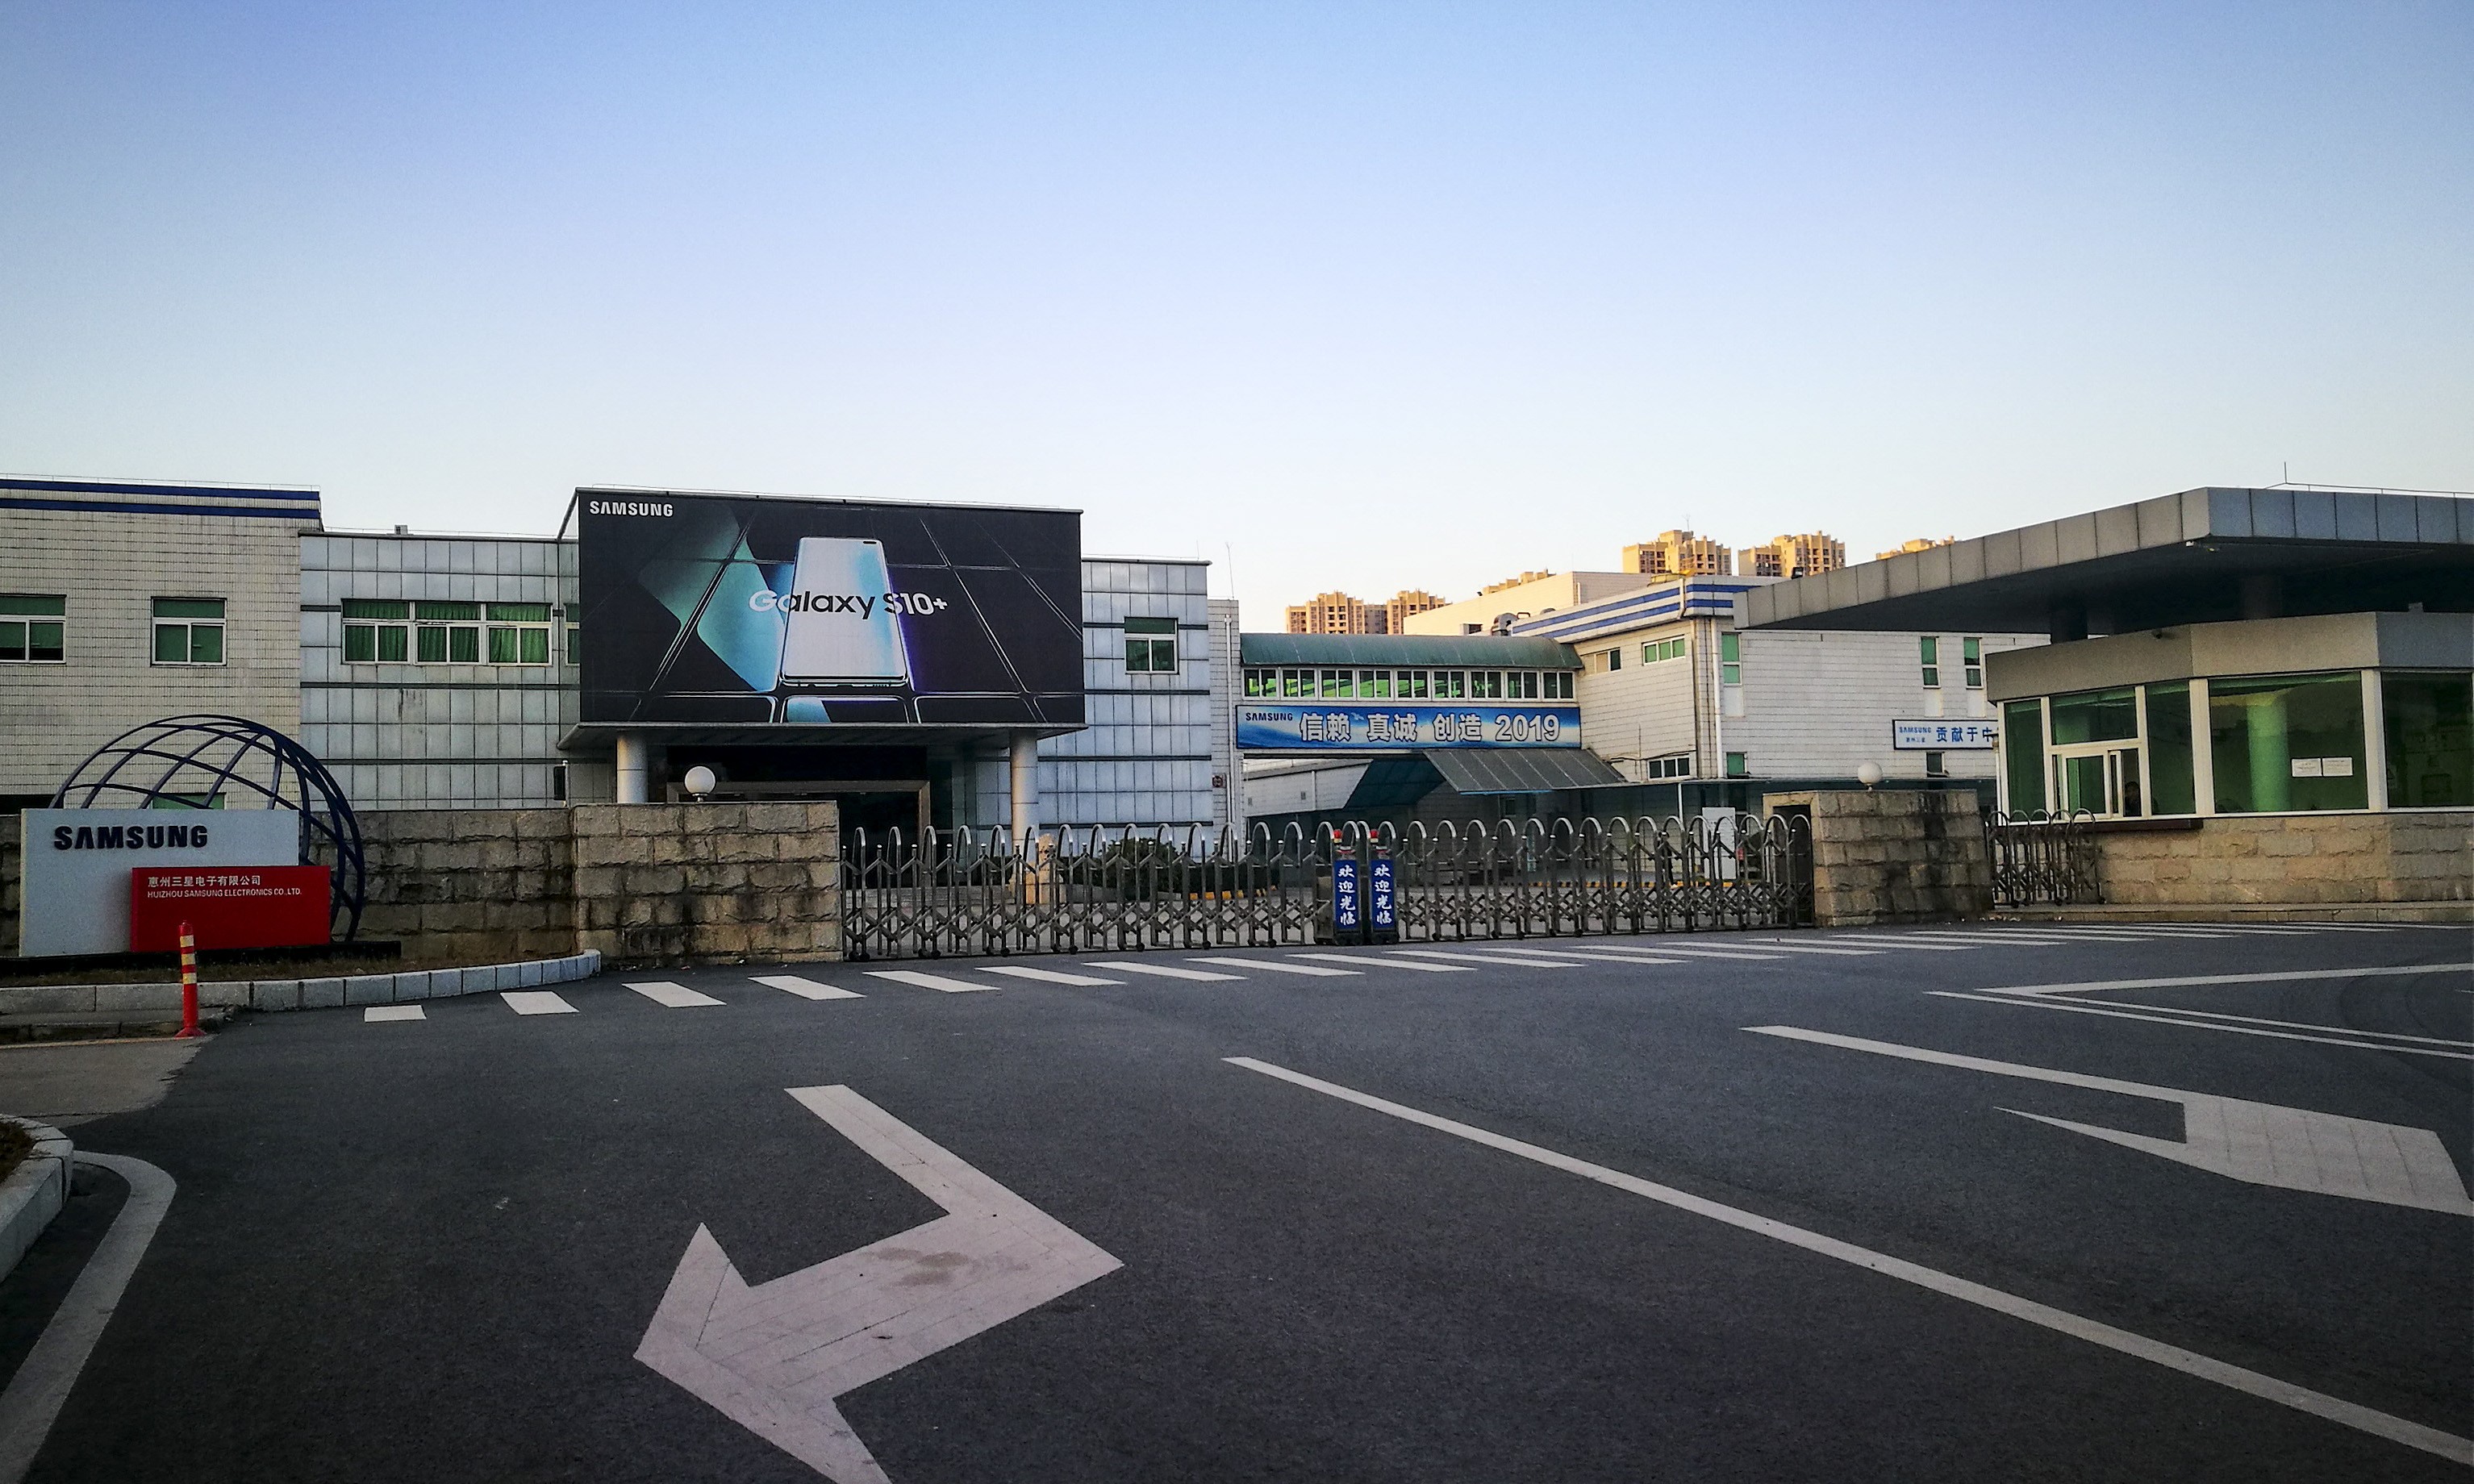 Samsung has shortened its supply chains in the wake of the trade war, working with more South Korean suppliers instead. Two months after it abandoned its Guangdong manufacturing hub in China, at least 60 per cent of shops in nearby communities have also closed. Photo: He Huifang